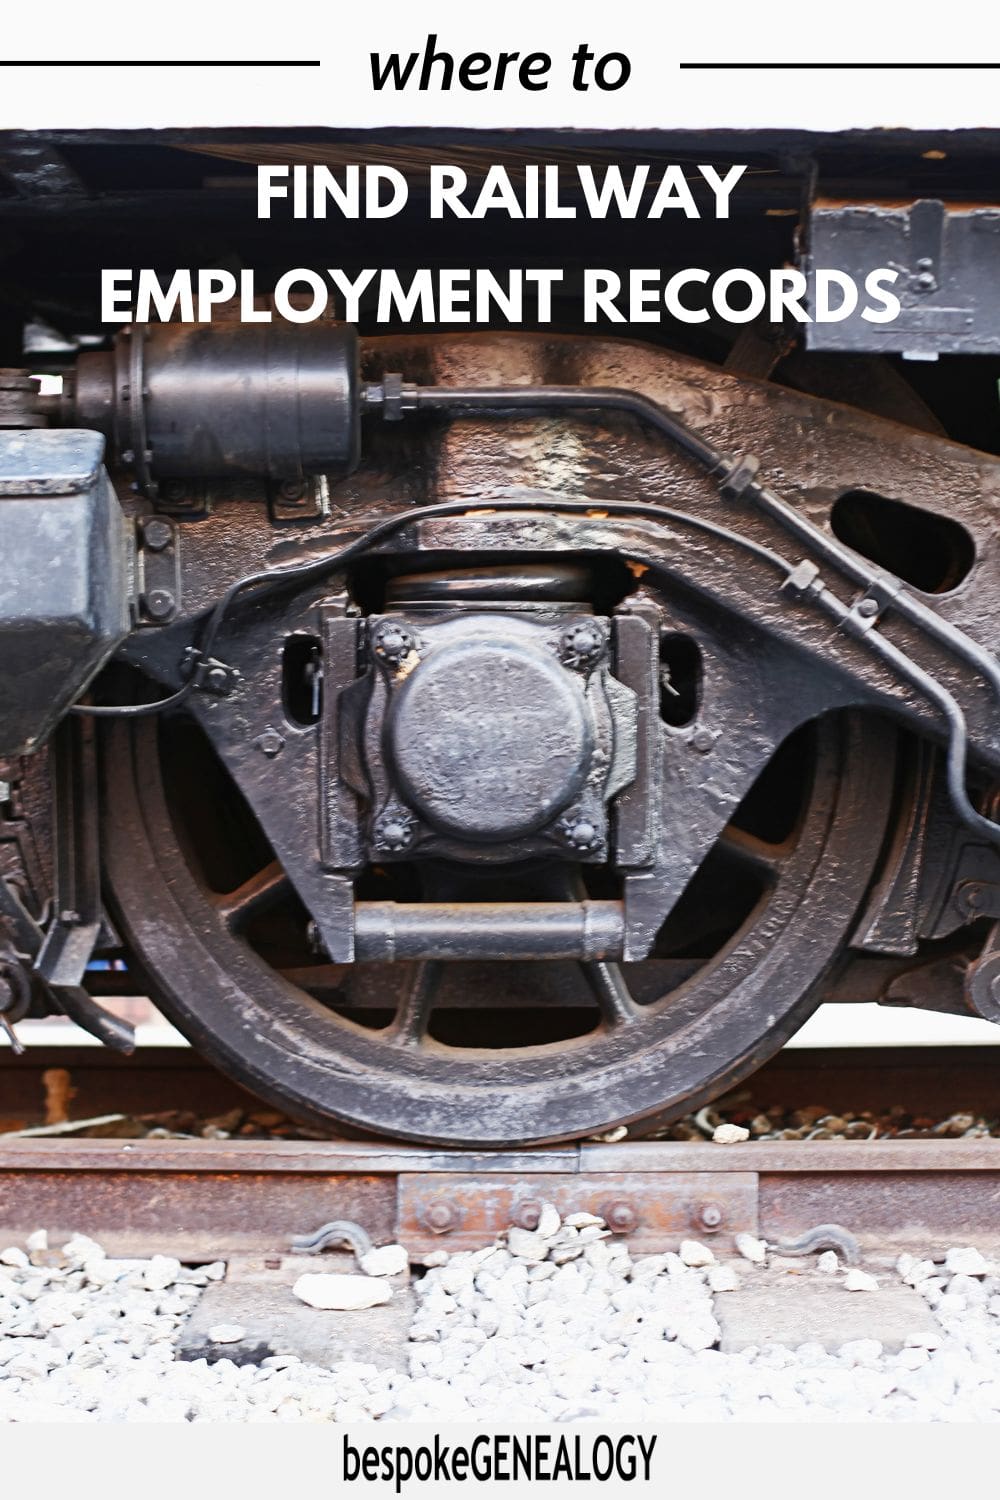 Where to find railway employment records. Photo of a railway carriage wheel.